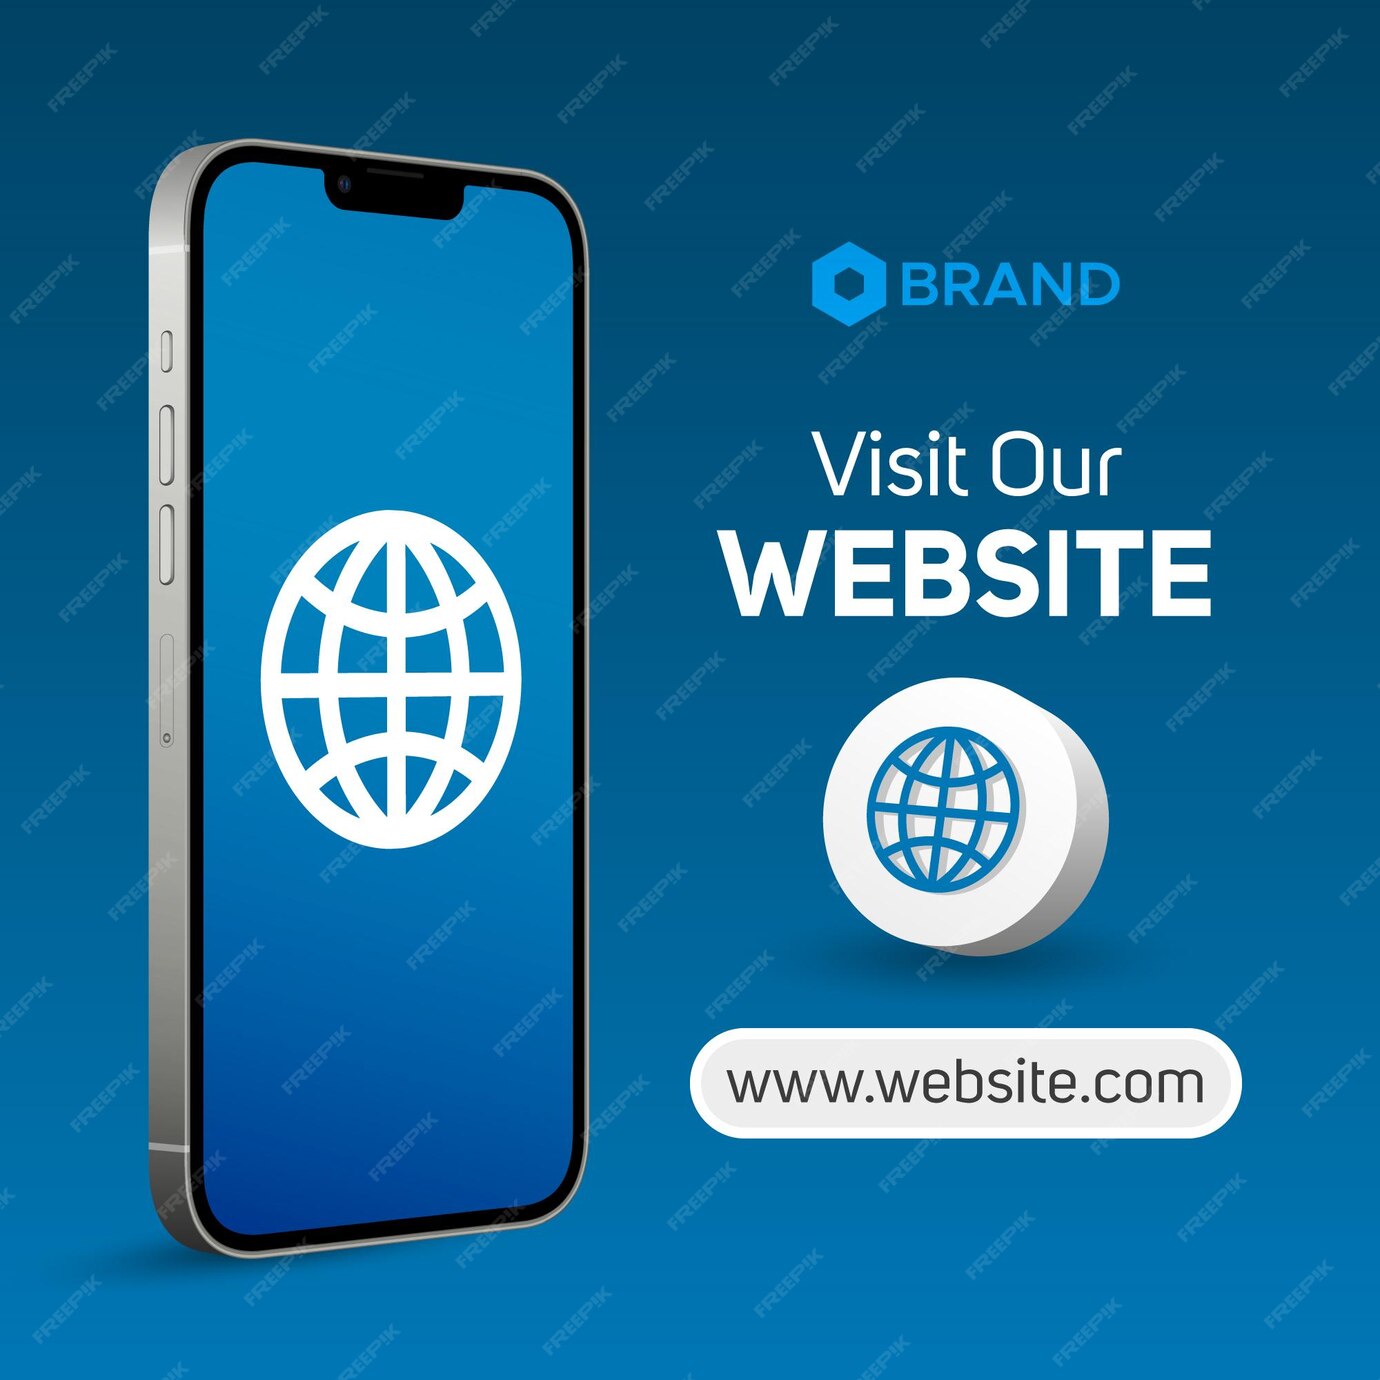 you can visit our website